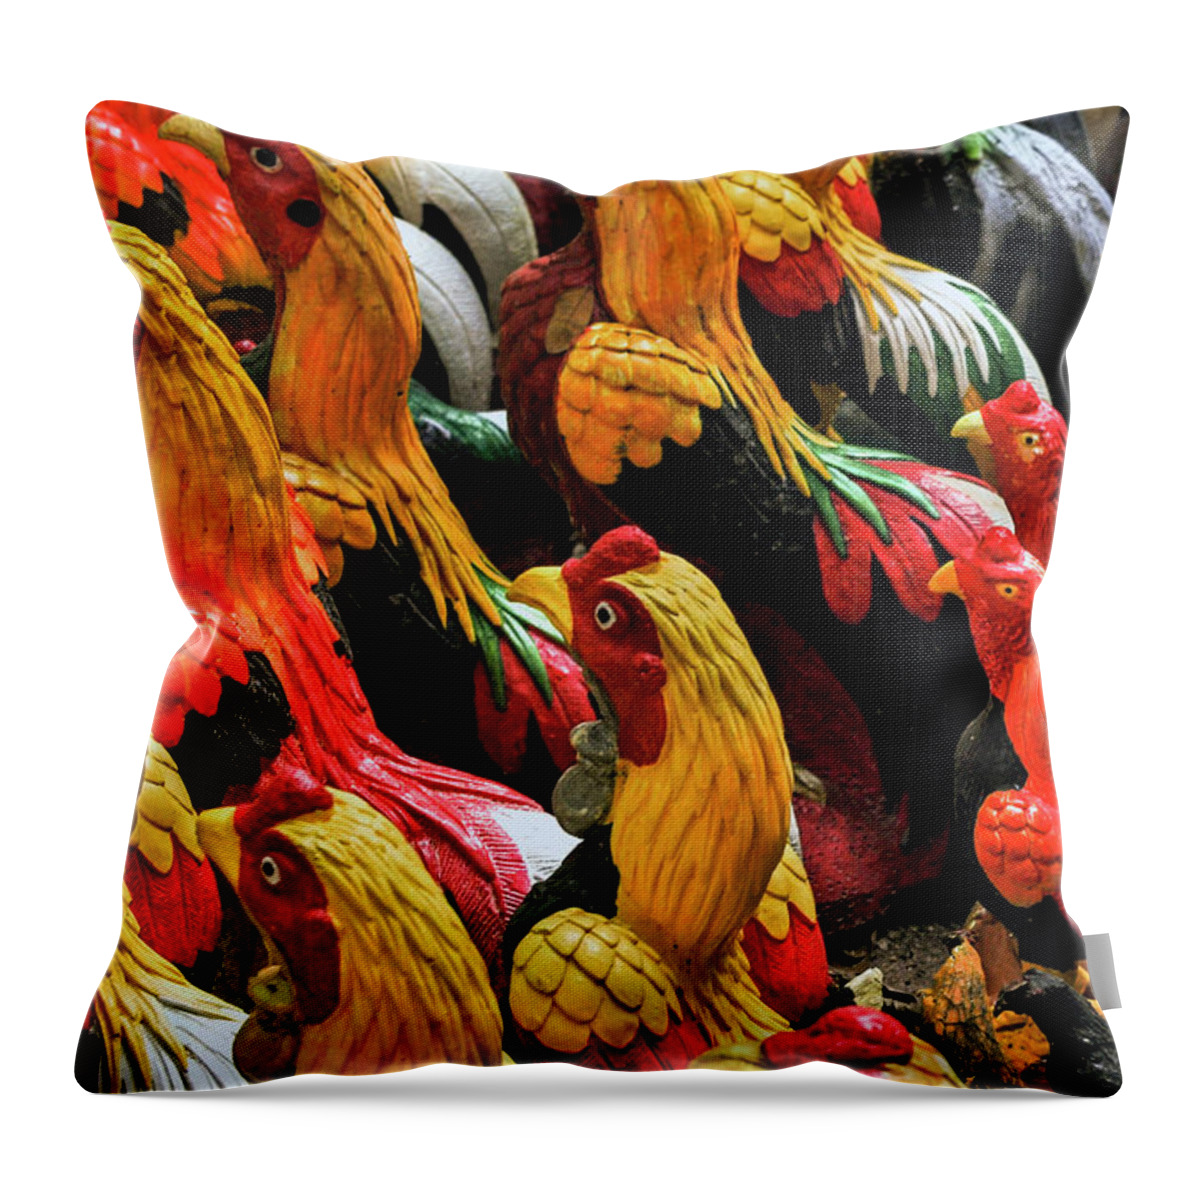 Tranquility Throw Pillow featuring the photograph Good Luck by Gabriel Perez